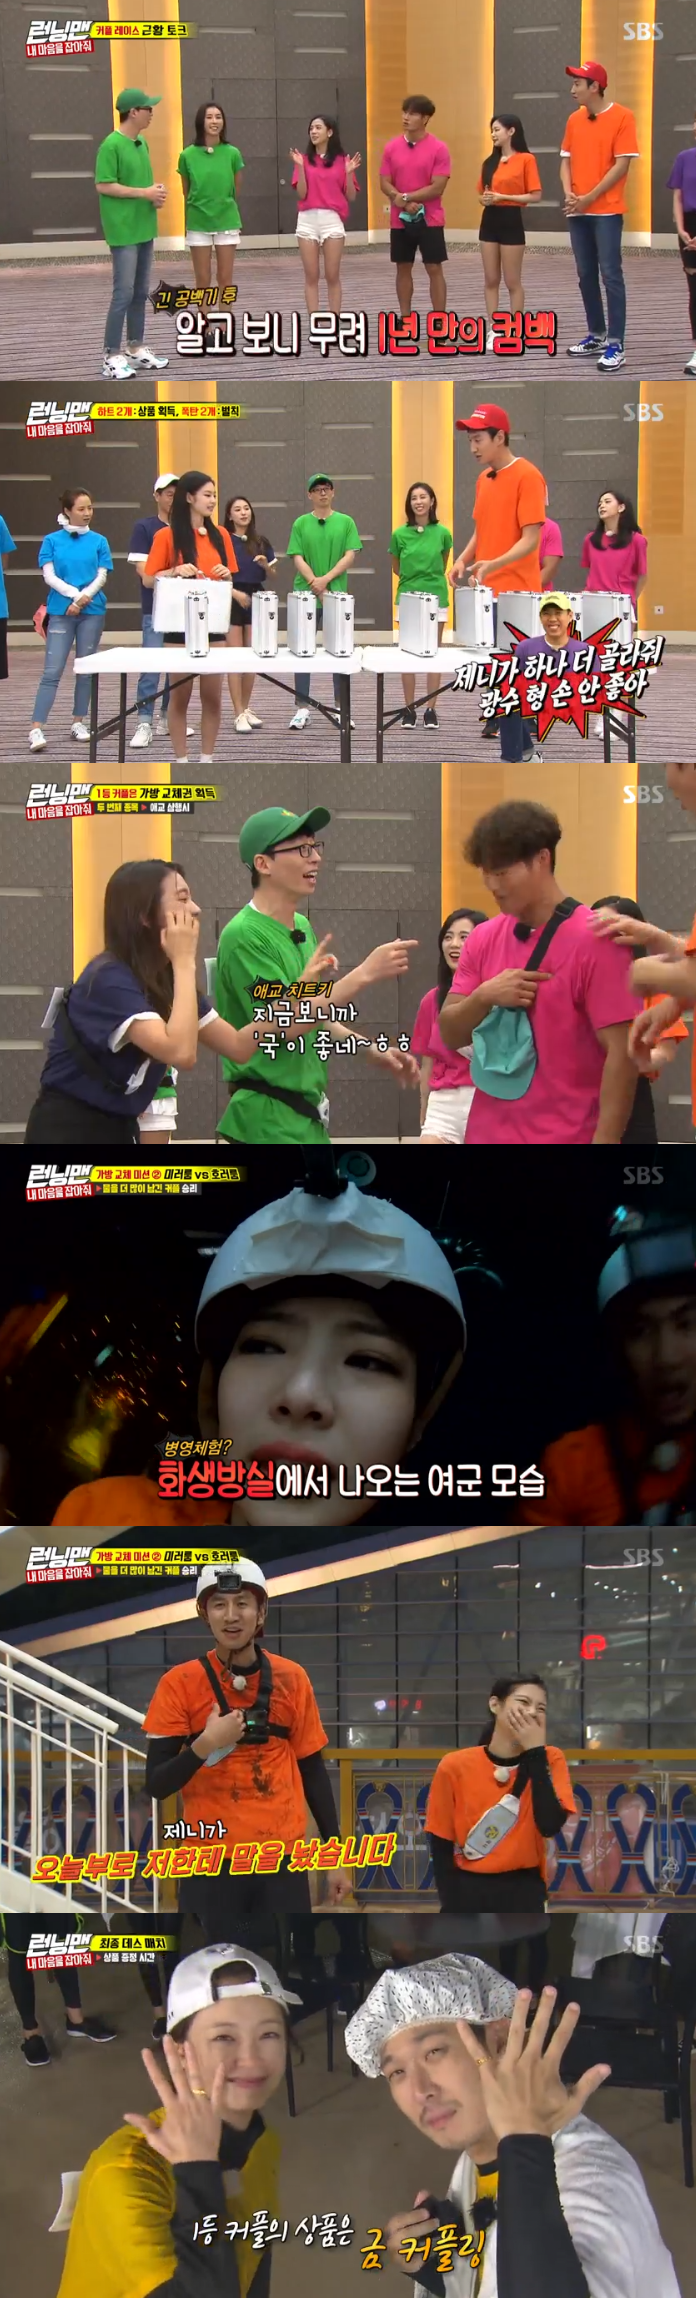 Running Man Jenny Kim played a limited role with Lee Kwang-soo.In the SBS entertainment program Running Man broadcasted on the afternoon of the 15th, a couple race was held with Han Eun-jung, Bora, Hwang Chi-yeol, Pyo Ye-jin, Black Pink JiSoo and Jenny Kim appearing as guests.Haha, who first heard the news that Black Pinks JiSoo and Jenny Kim were guest-starring, revealed his fanship about Jenny Kim.But Jenny Kim became a mate for Lee Kwang-soo; Haha was on the same side as Jeon So-min; Ji Suk-jin became a couple with Bora.Ji Suk-jin laughed when Bora screamed and said, I do not like you.Yoo Jae-Suk said Black Pink had a one-year vacancy and said it was too long and asked Yang Hyun-suk, president of YG Entertainment, to send a video letter.Jenny Kim shyly said, Let us come back twice a year, prompting members to smile at their dad, who agreed with a cute pose with his arm around his waist.The mission was a rule to cover the winner and the penalty team by exchanging heart bags and bomb bags through Game.The first game event was a dance battle submitted by Jenny Kim, who showed off his magnetic performance with a spoon after a long time.Han Eun-jung boldly masked the top he was wearing, leaving the members baffled; the victory went to Ji Suk-jin Bora.The second Battle was followed by a triangular poem by Pyo Ye-jin; however, Pyo Ye-jin was criticized for its esoteric triangular poetry.Jenny Kim topped Lee Kwang-soo for melting charmThe next mission was at the outdoor Blackwater Park, a game in which a couple who carried a water cup and passed through one of the horror rooms and mirror rooms and left more water in the water cup won.Jenny Kims horror room experience was the highlight of the day: Im confident in fear.Jenny Kim, who said, I will take the lead in the horror room, hung on to Lee Kwang-soo, wailing from the time of the first ghost.Lee Kwang-soo, who took Jenny Kim out of the horror room at the end of the twists and turns, commented, It is the most coward I have ever seen in my life.The following game was followed on the ride in Blackwater Park: I was able to win a heart on the instrument or torn off the name tags of another team to hand over the bomb.Teams without bombs were on rides, seeking to acquire Hearts and teams with bombs were in a hurry to rip off the name tag; the first place was won by Haha and Jeon So-min.The last was a couple of Pyo Ye-jin Yang Se-chan and Lee Kwang-soo Jenny Kim; the final last was Lee Kwang-soo Jenny Kim.On the other hand, SBS Running Man is broadcast every Sunday at 4:50 pm.Photo SBS broadcast screen capture